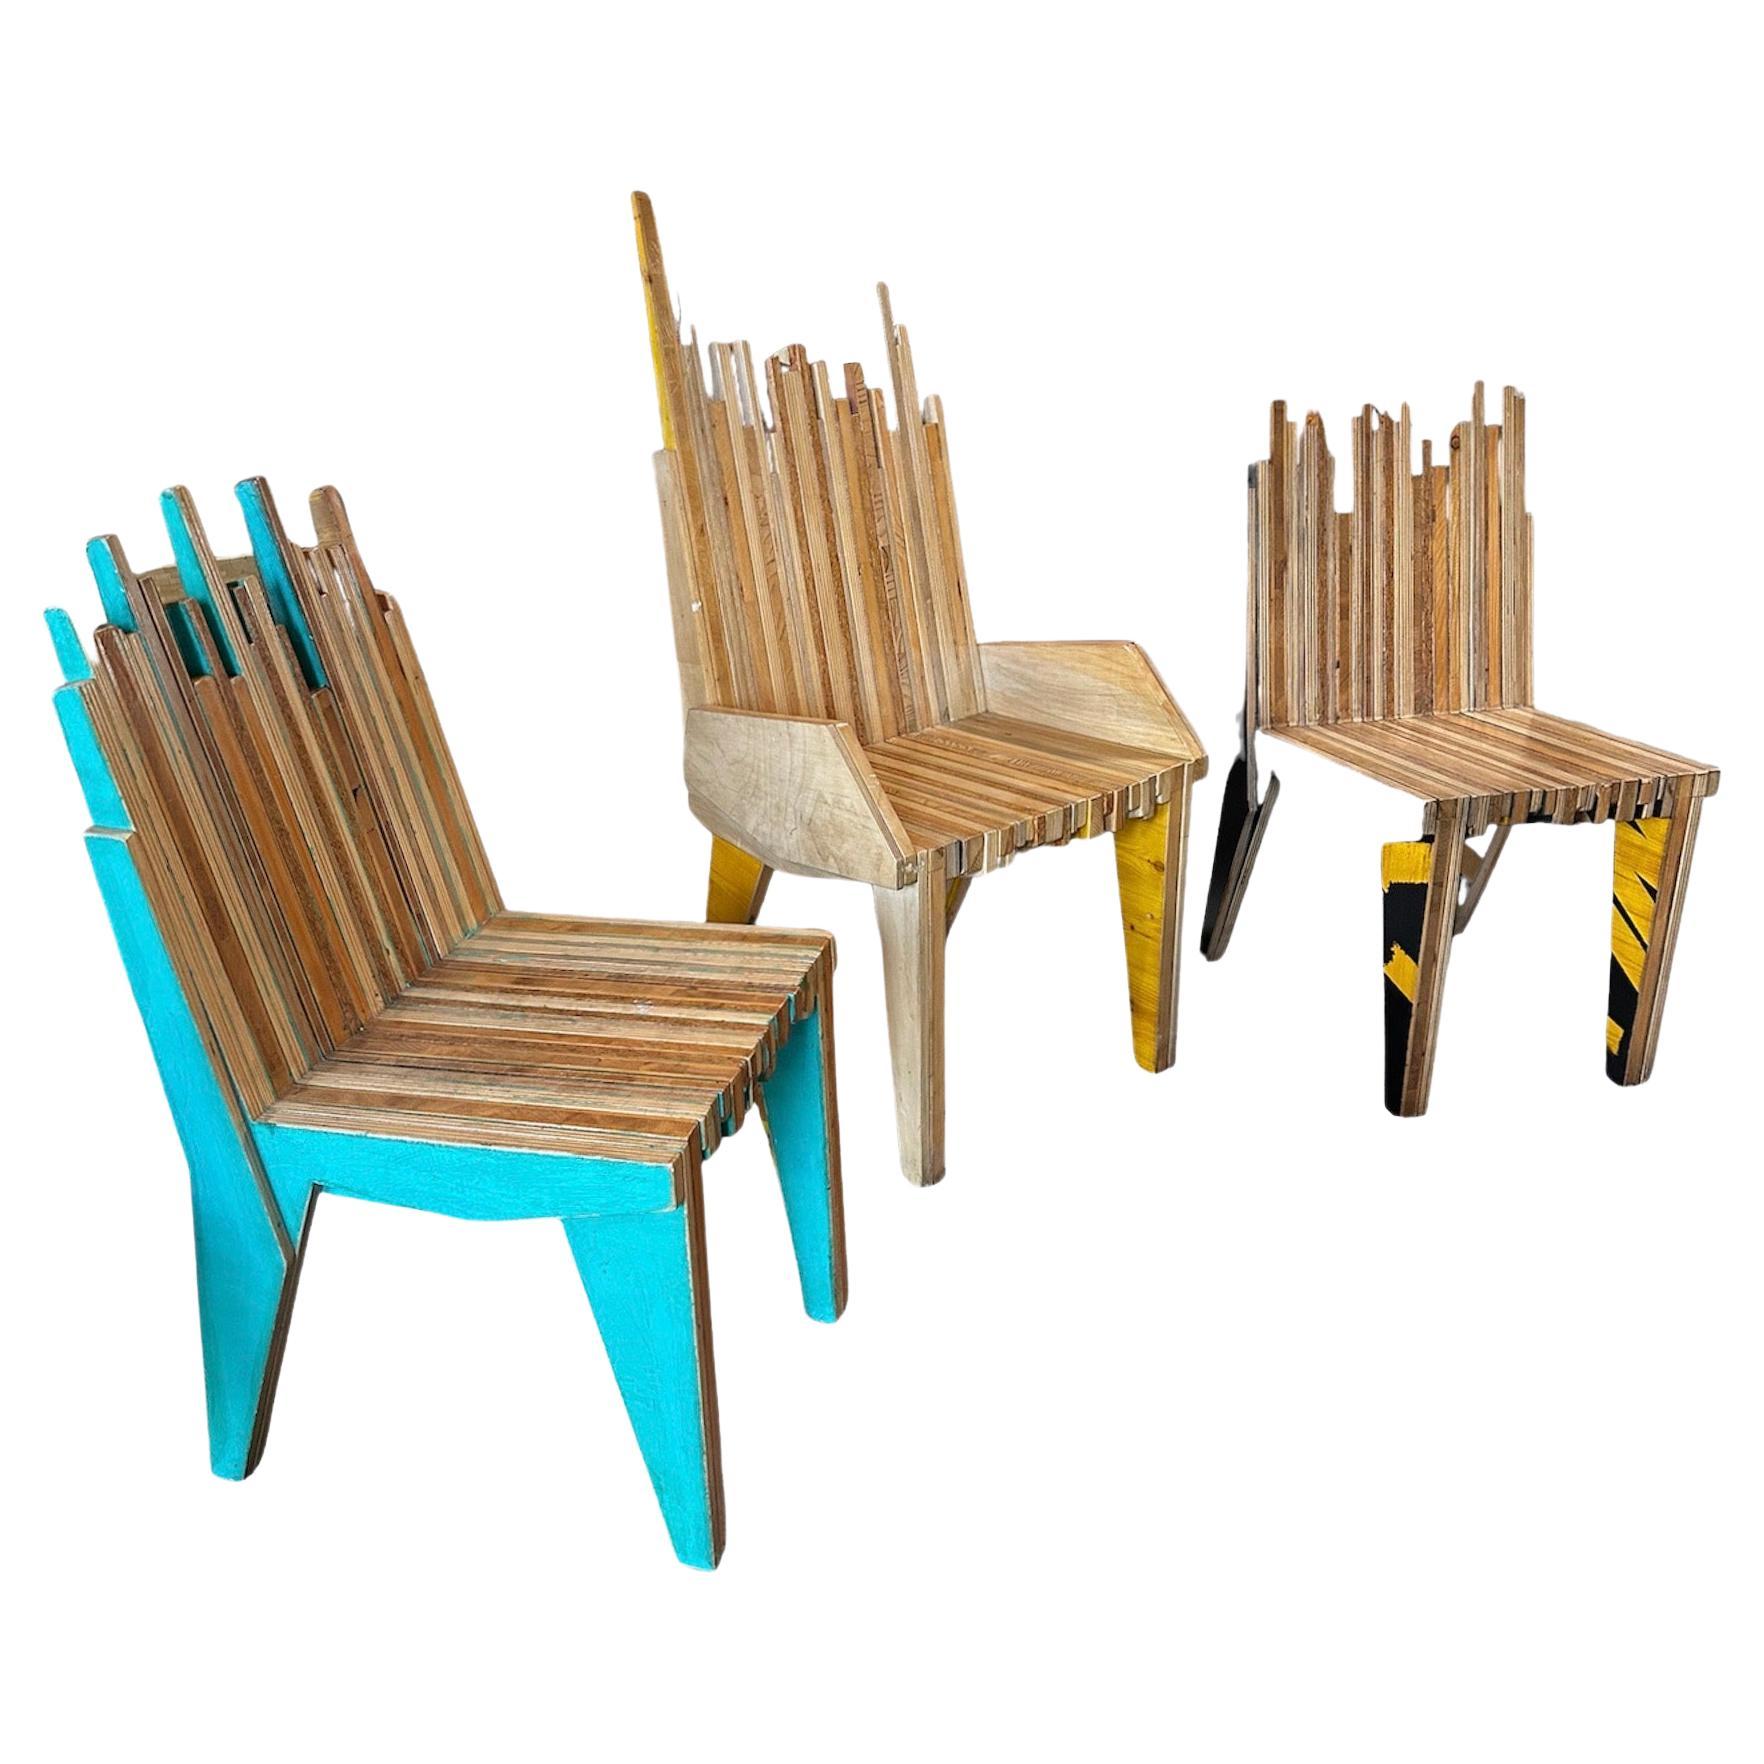 Set of 3 Rare Wood Chairs  By Robino &  Denton For Petroglyph 2011 For Sale